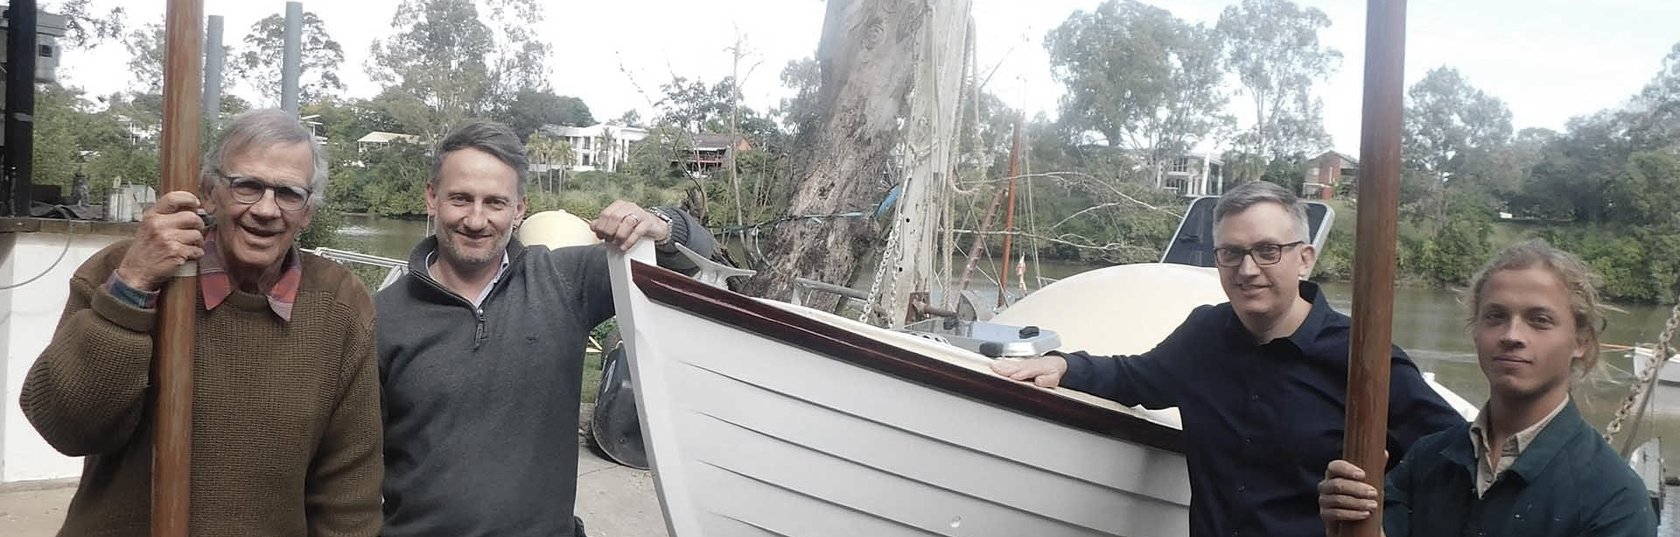 His greatest adventure: Tom will row across Pacific on Responsible Wood